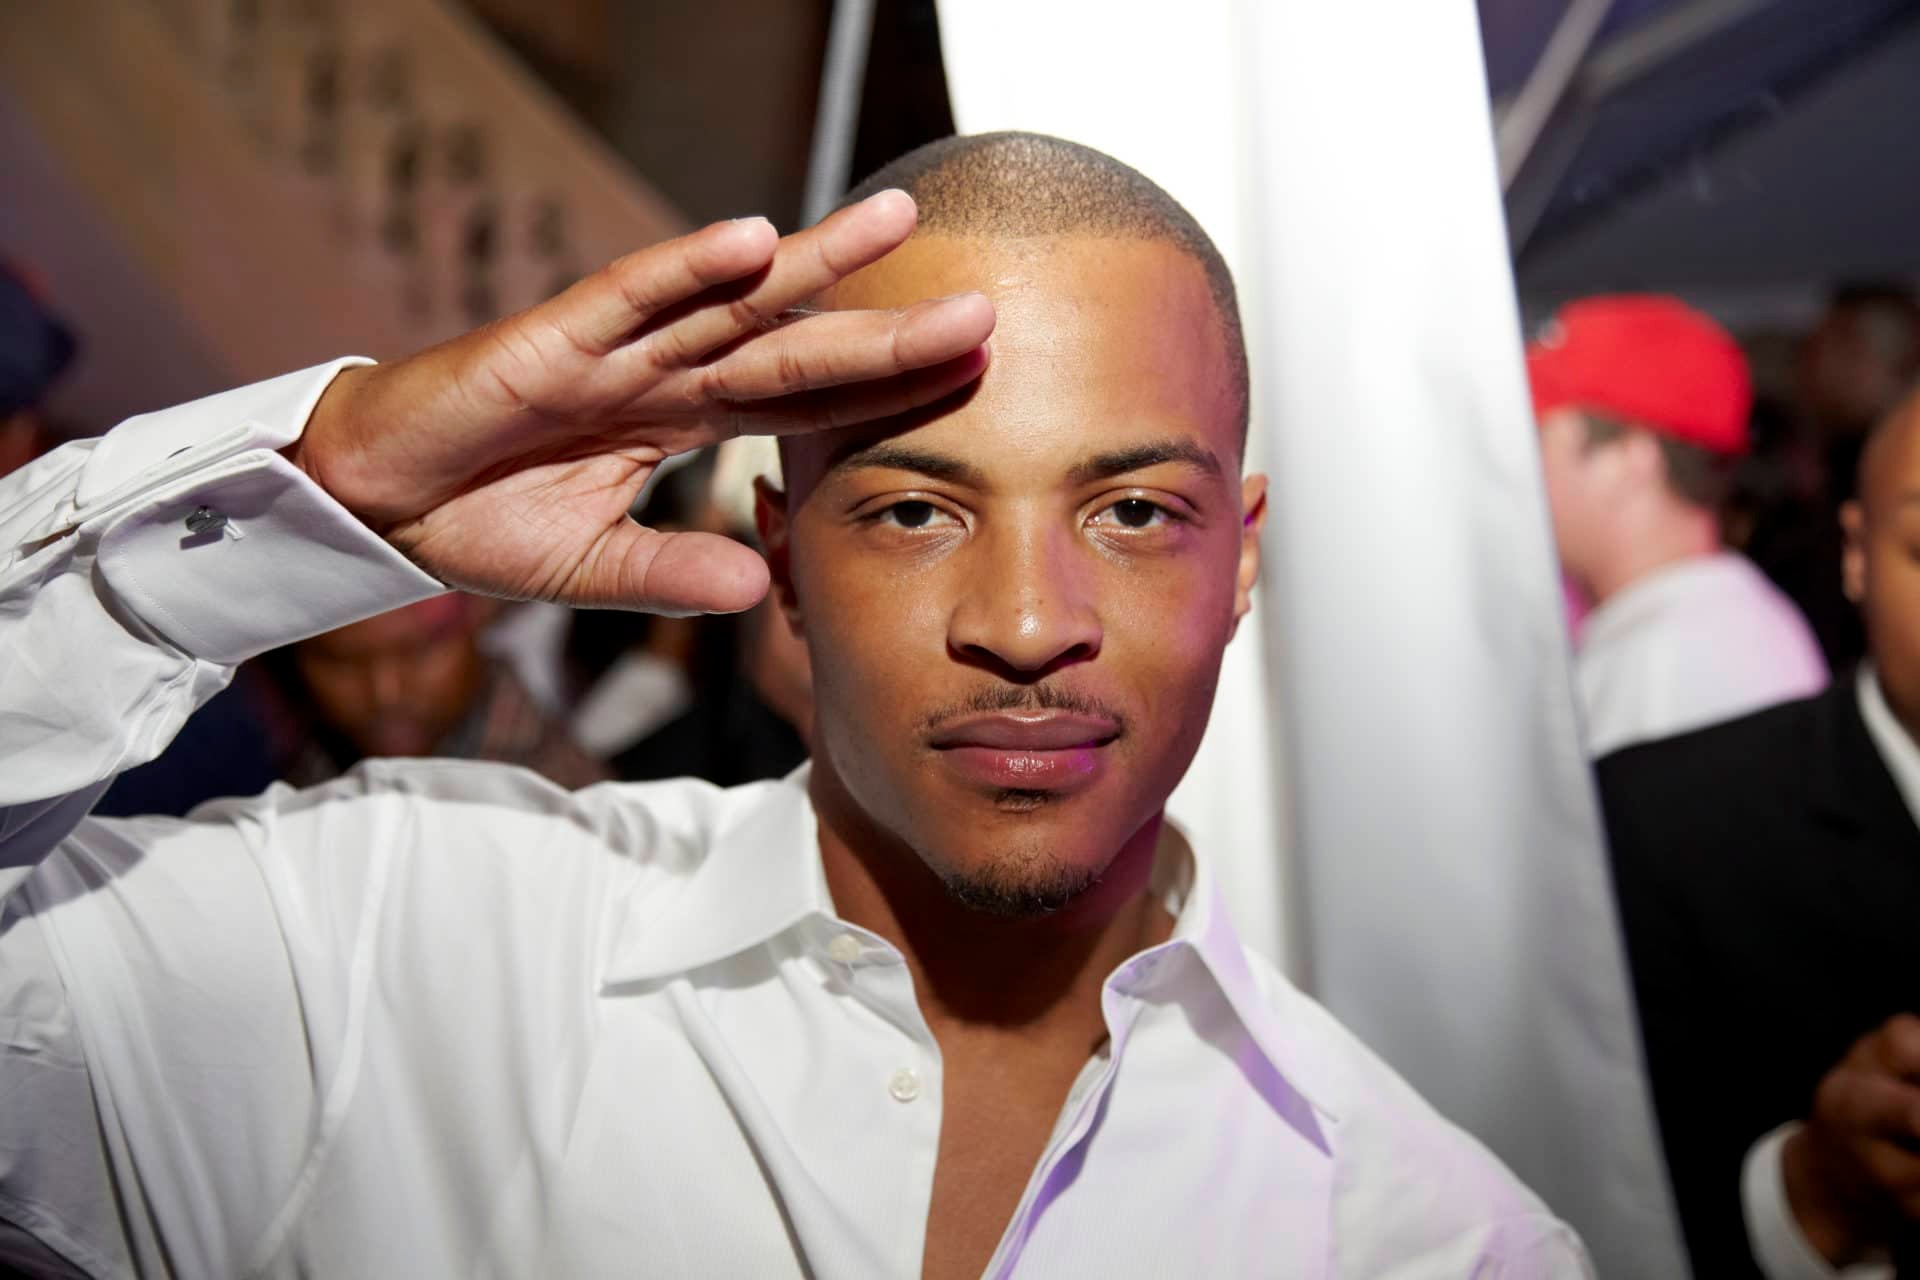 An Easter Miracle! T.I. Helps Raise $120,000 To Bail Out Nonviolent Offenders